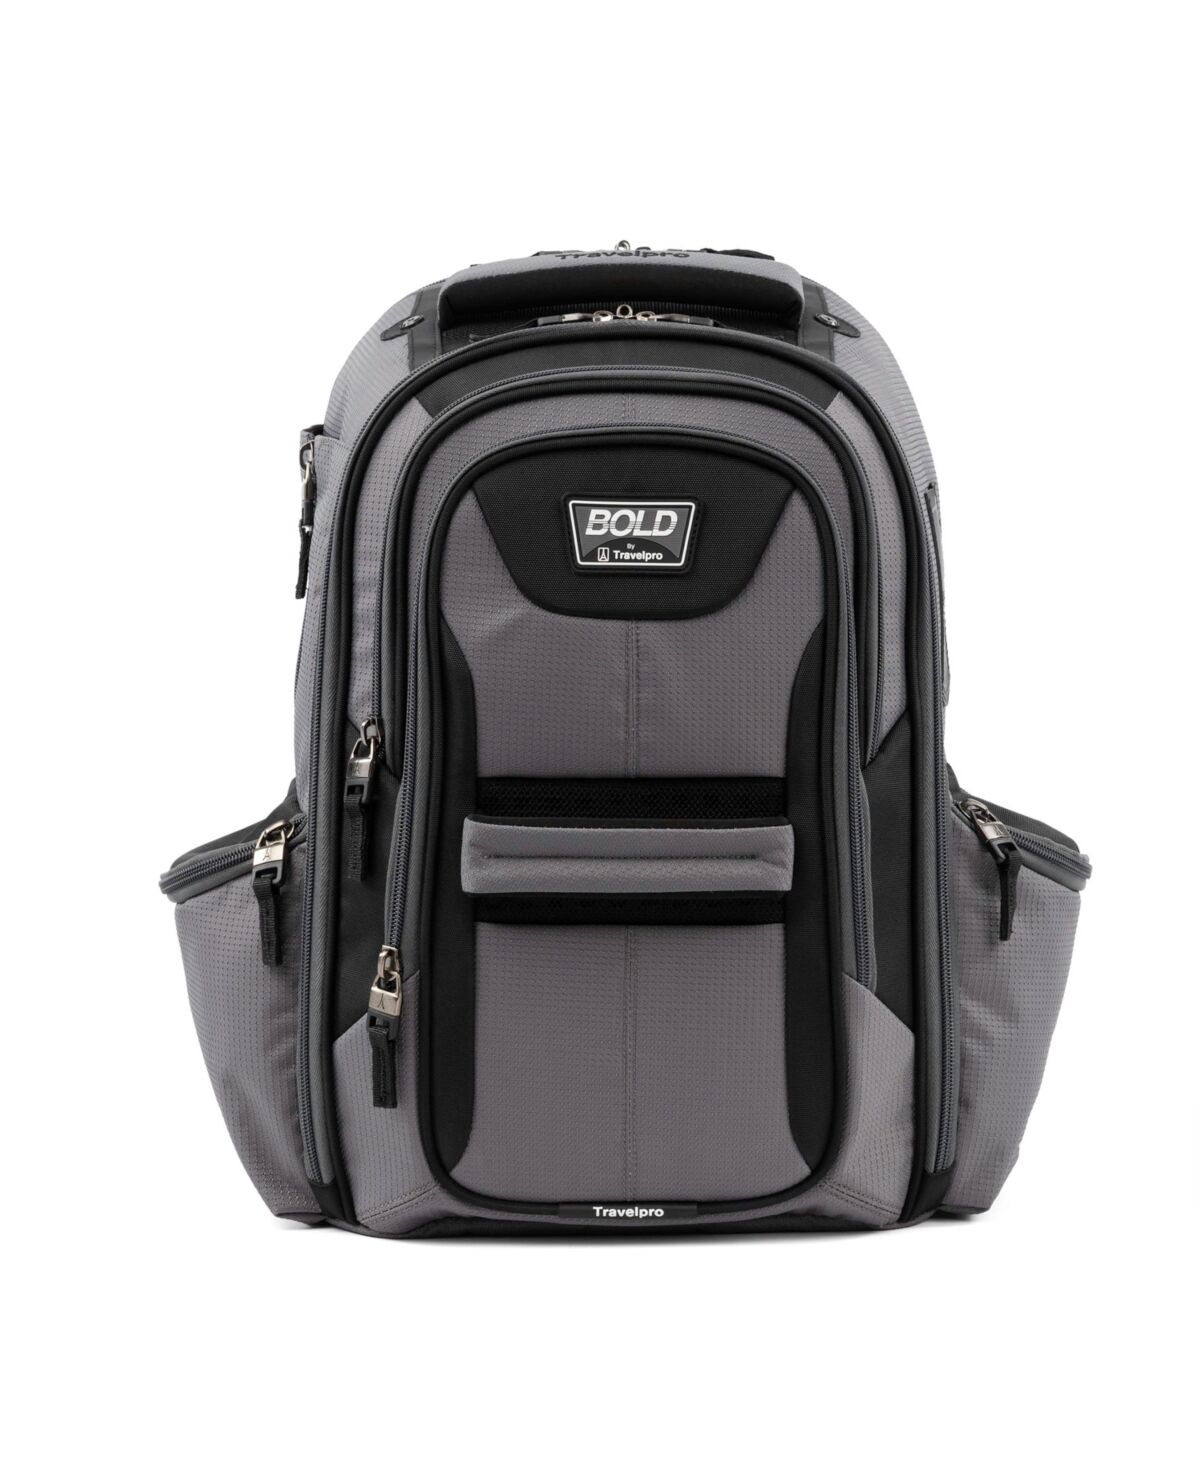 Travelpro Bold Computer Backpack - Gray